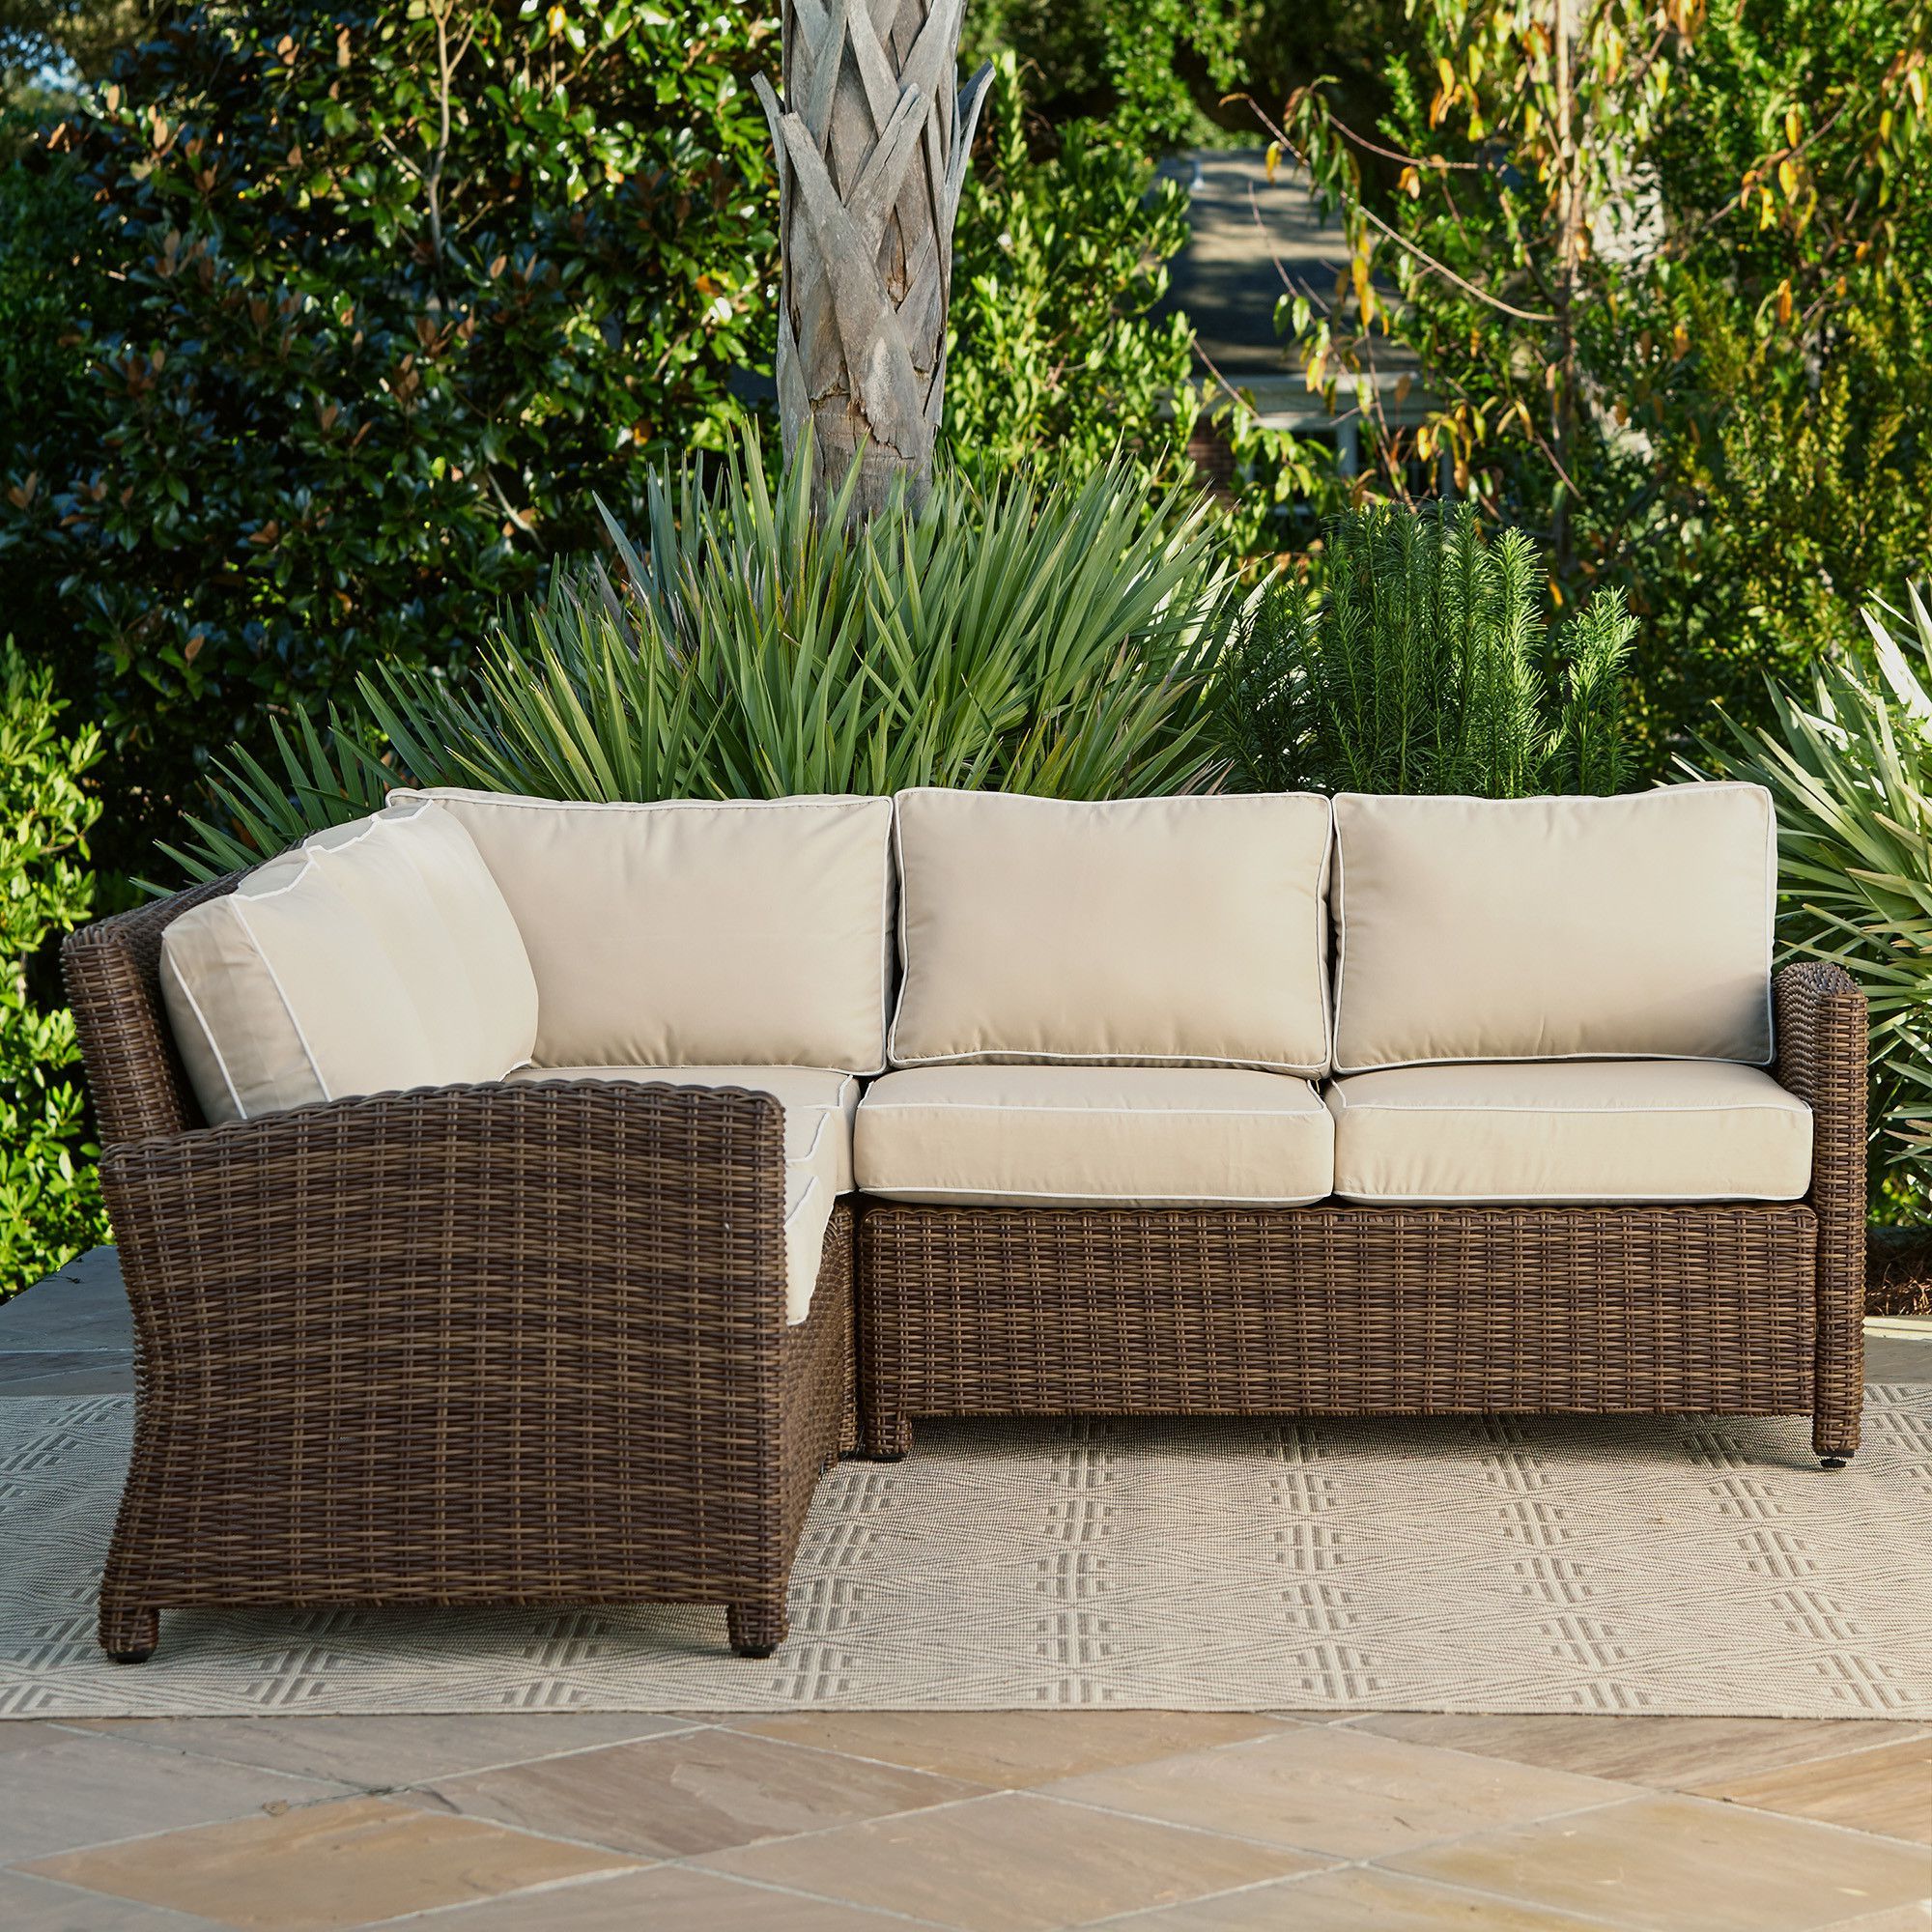 Recent Lawson Patio Sofas With Cushions Within Birch Lane Lawson Wicker Sectional & Reviews (View 8 of 25)